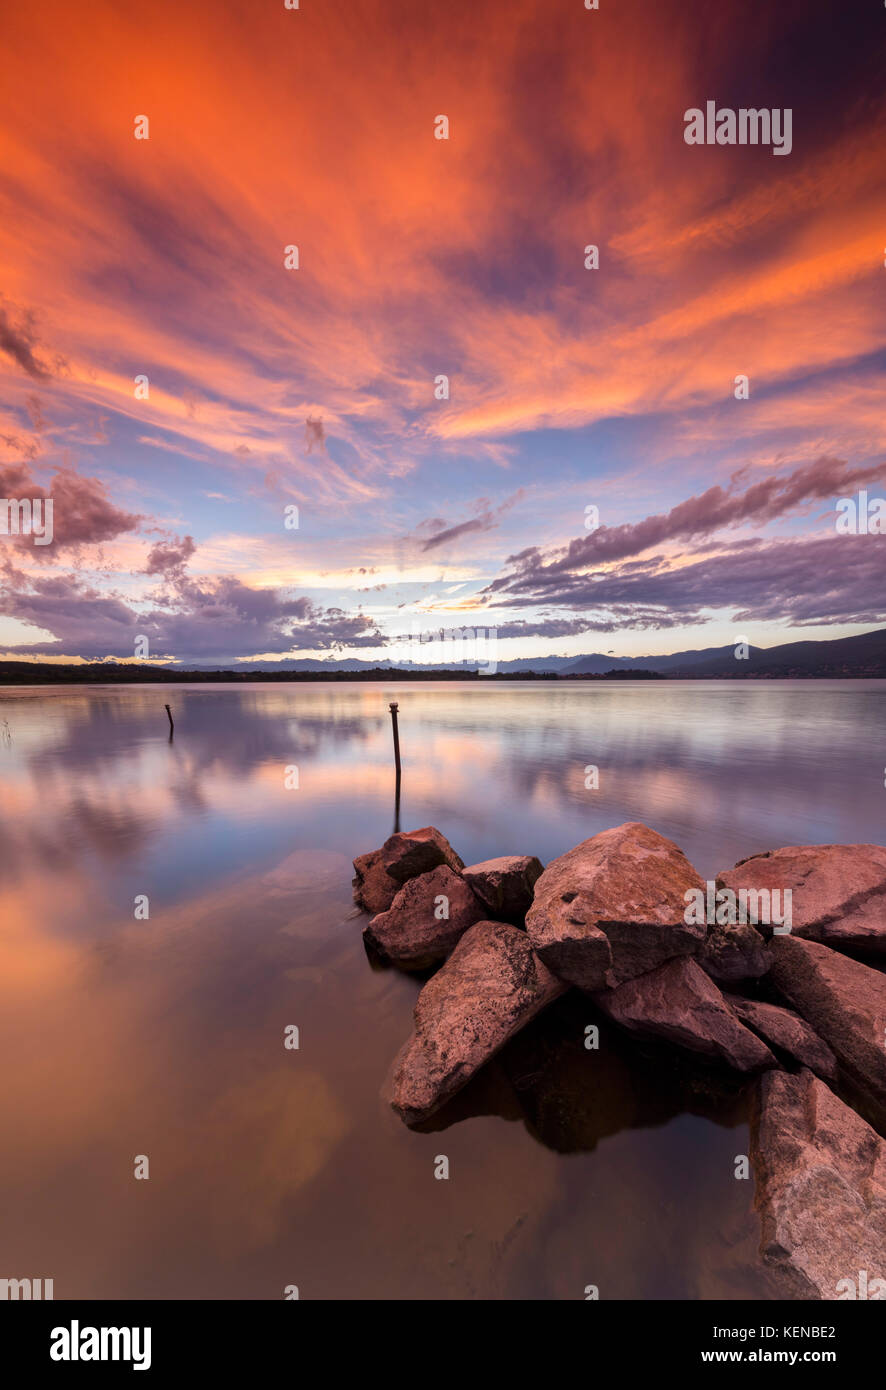 A summer sunset reflecting on Lake Varese at Cazzago Brabbia harbour, Varese Province, Lombardy, Italy. Stock Photo